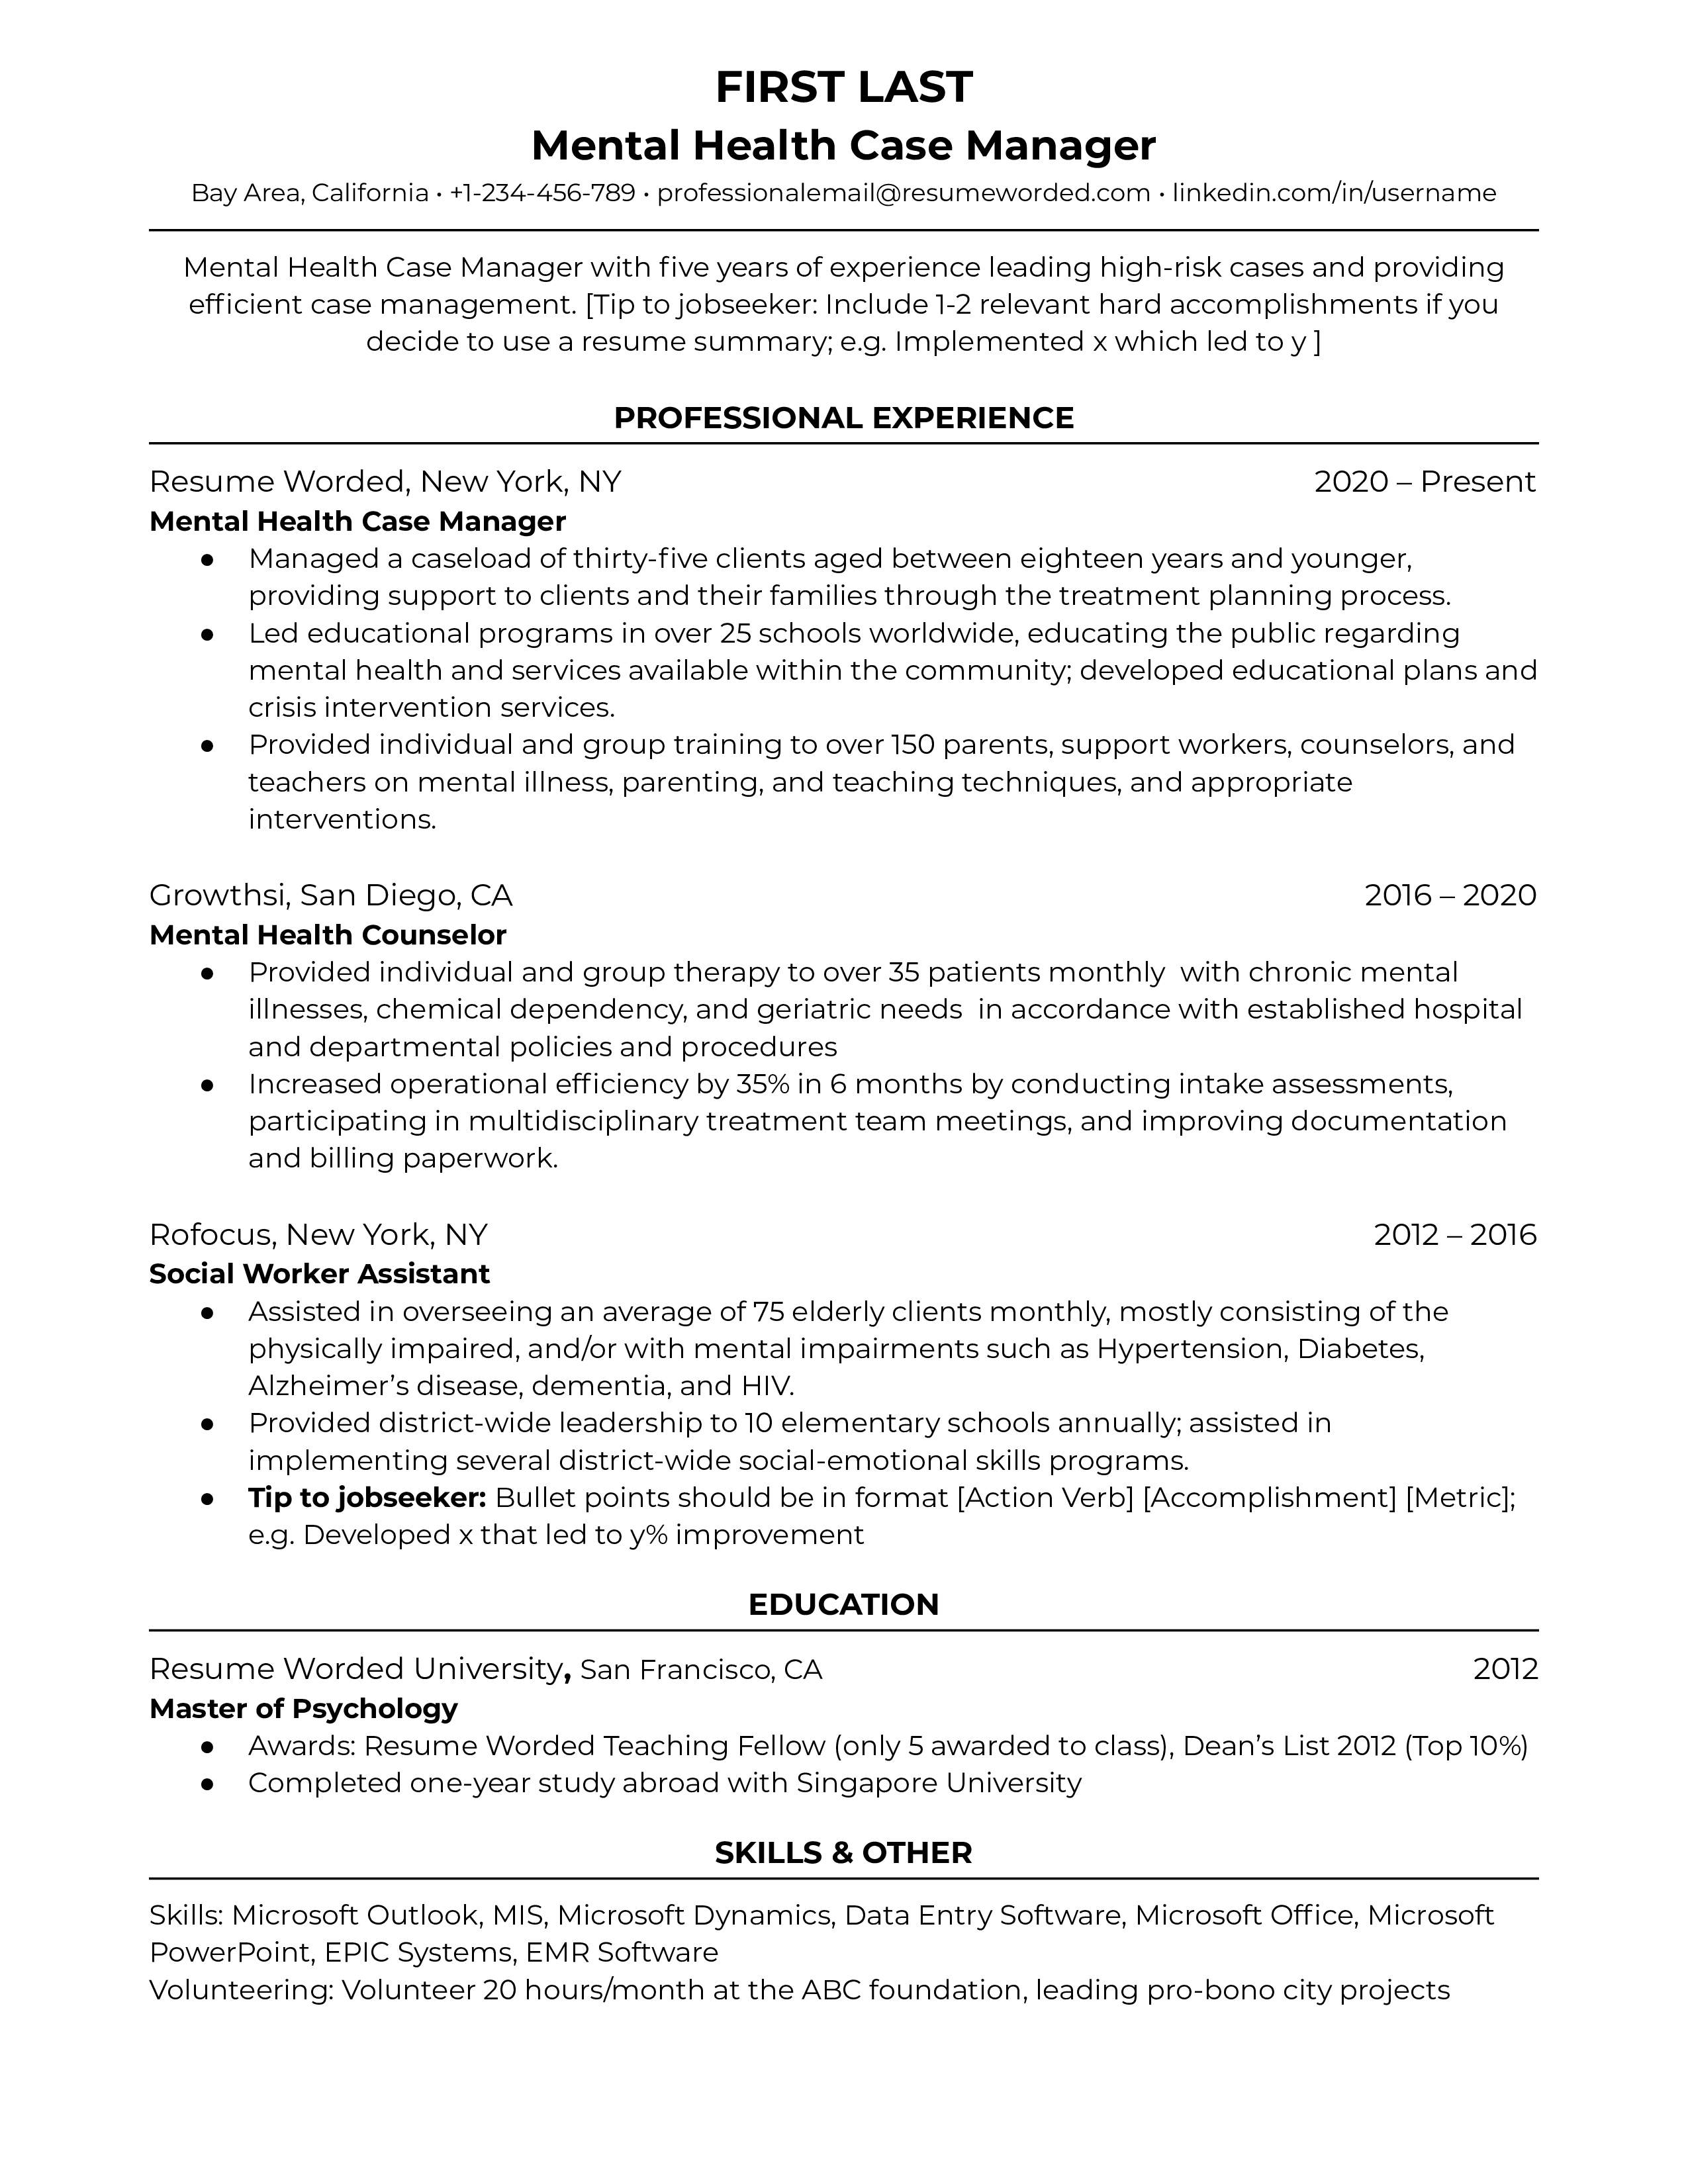 A professional CV showcasing experience and skills for a Mental Health Case Manager role.